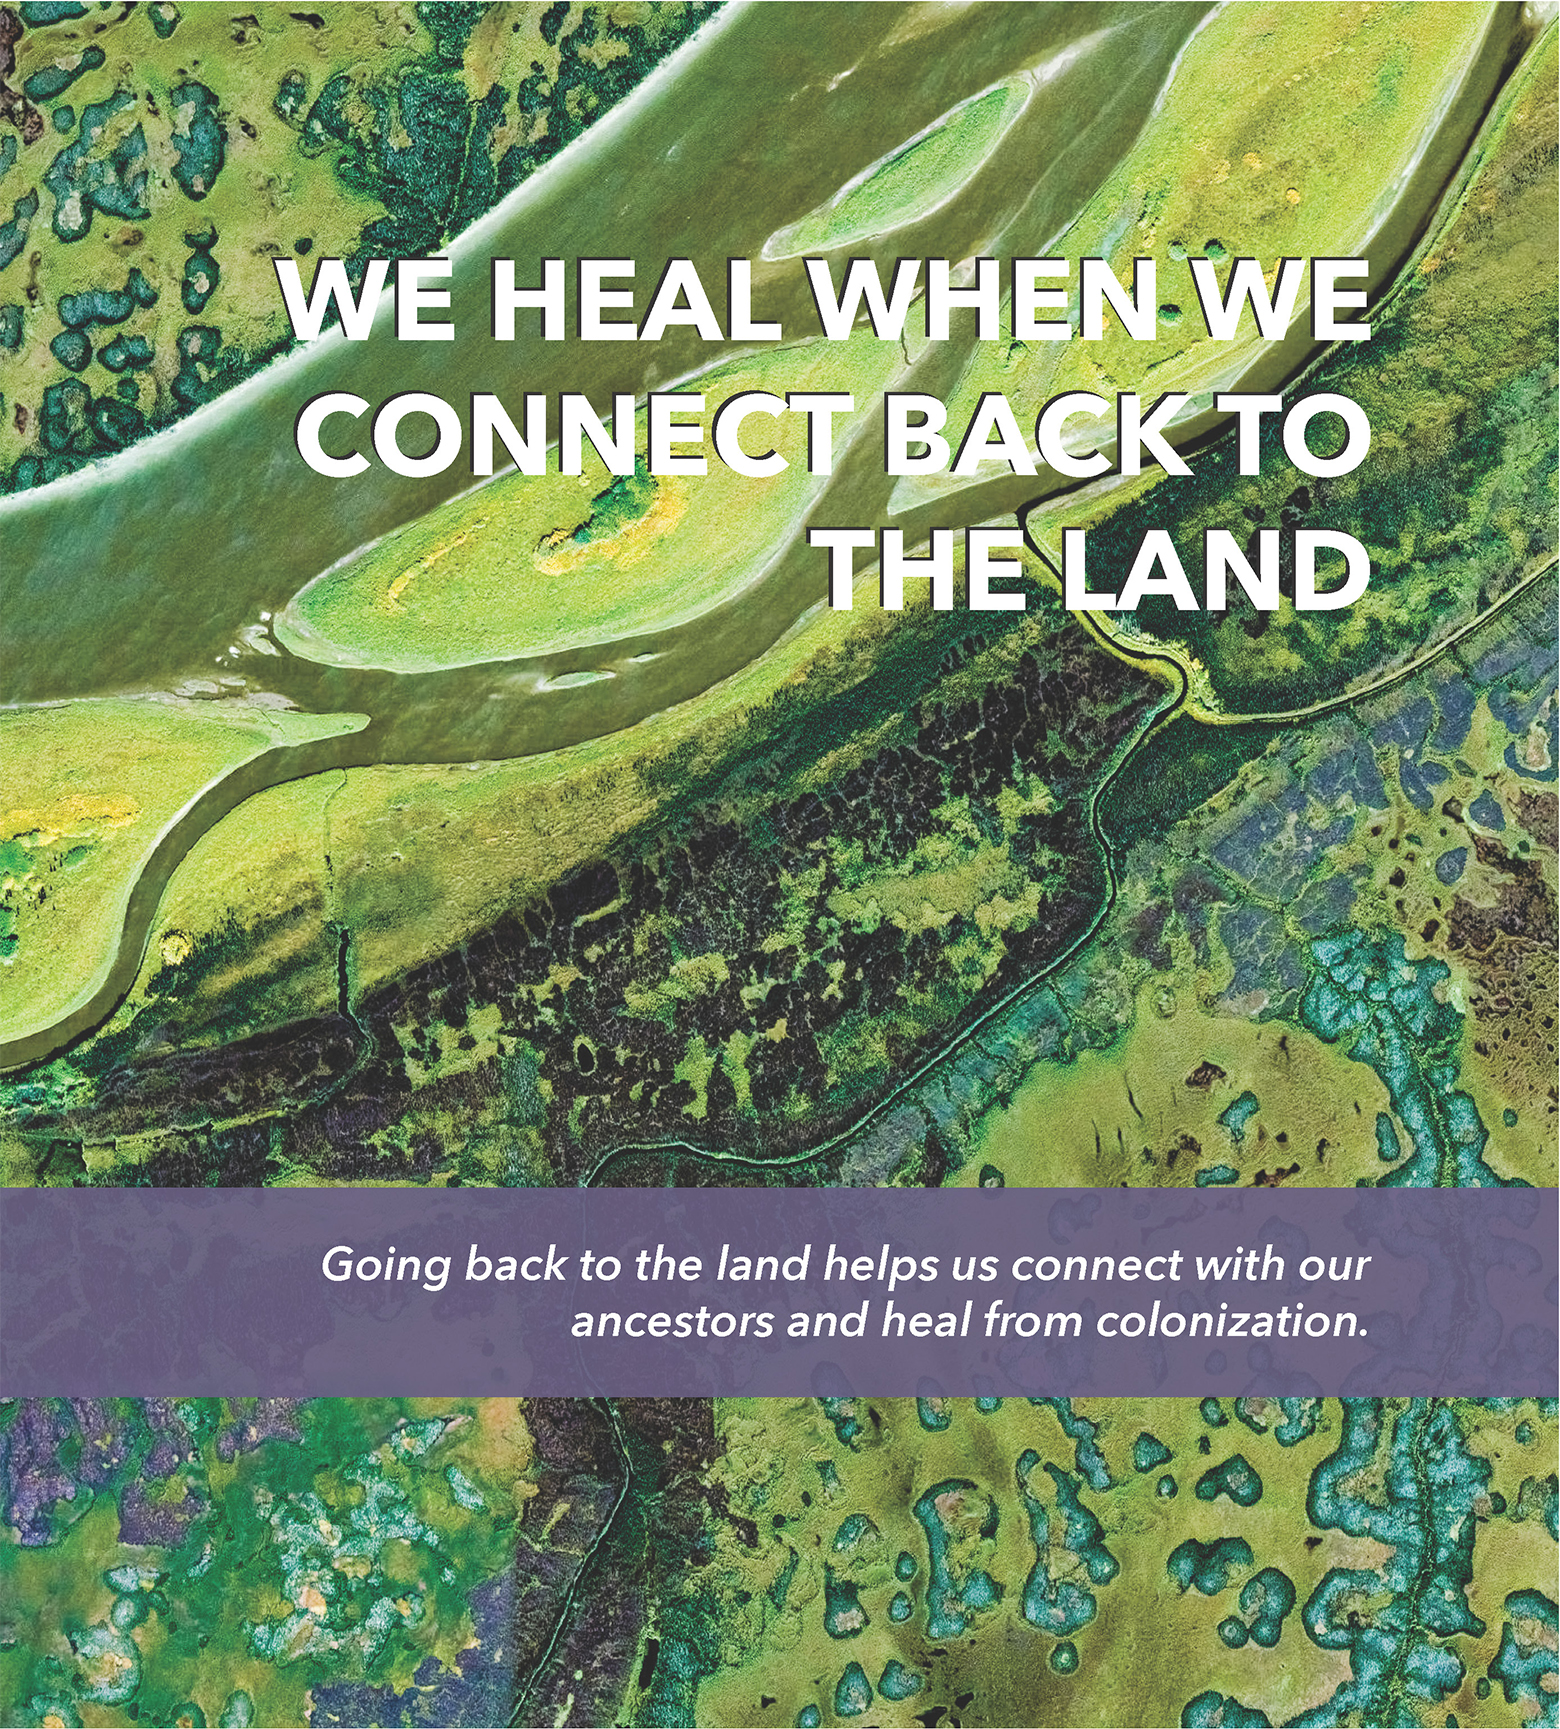 WE HEAL WHEN WE CONNECT BACK TO THE LAND